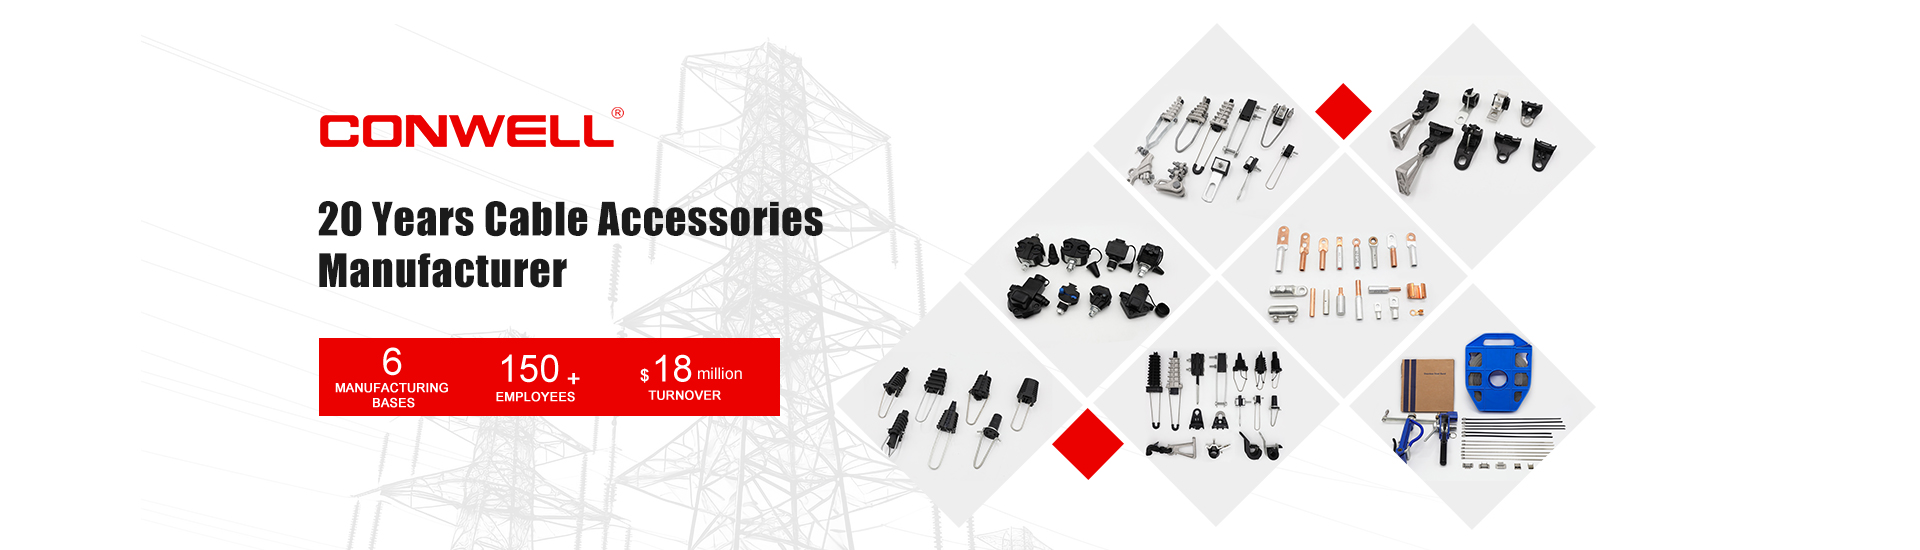 20 Years Cable Cccessories Manufacturer